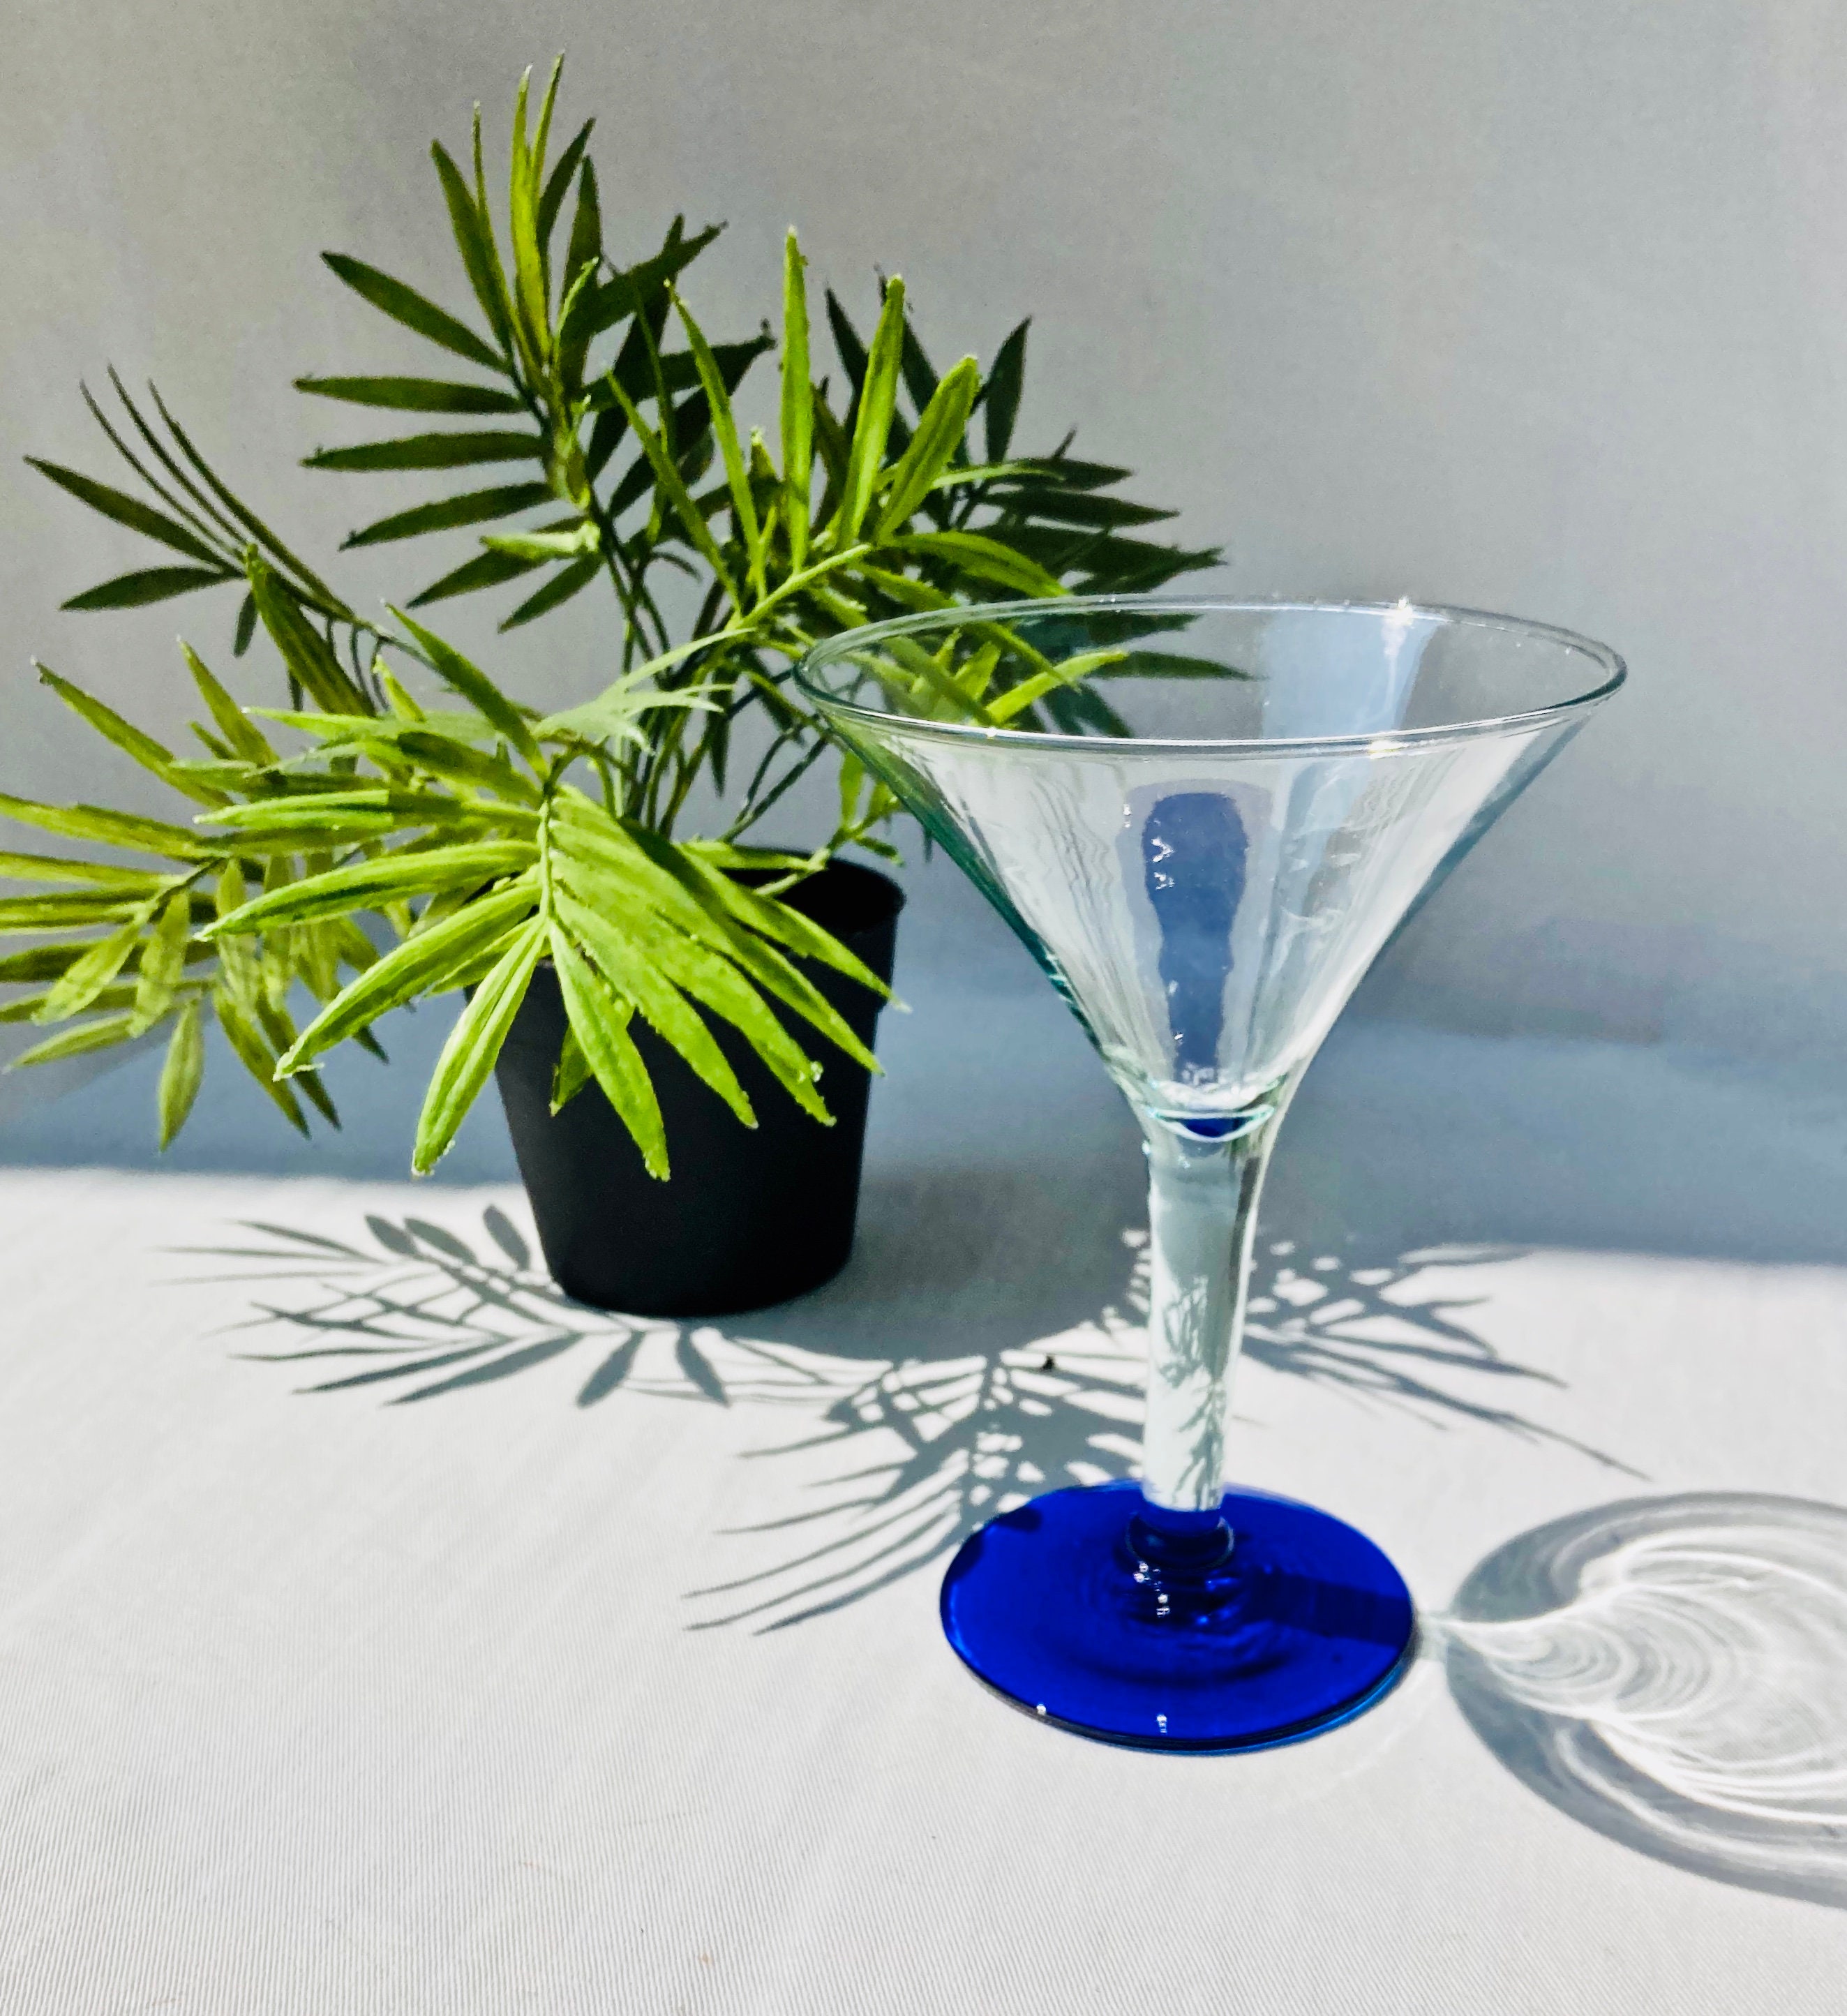 MEXHANDCRAFT Emerald Green Rim 10 oz Martini Glasses (Set of 6), Recycled Glass, Lead-Free, Toxin-Free (Martini)